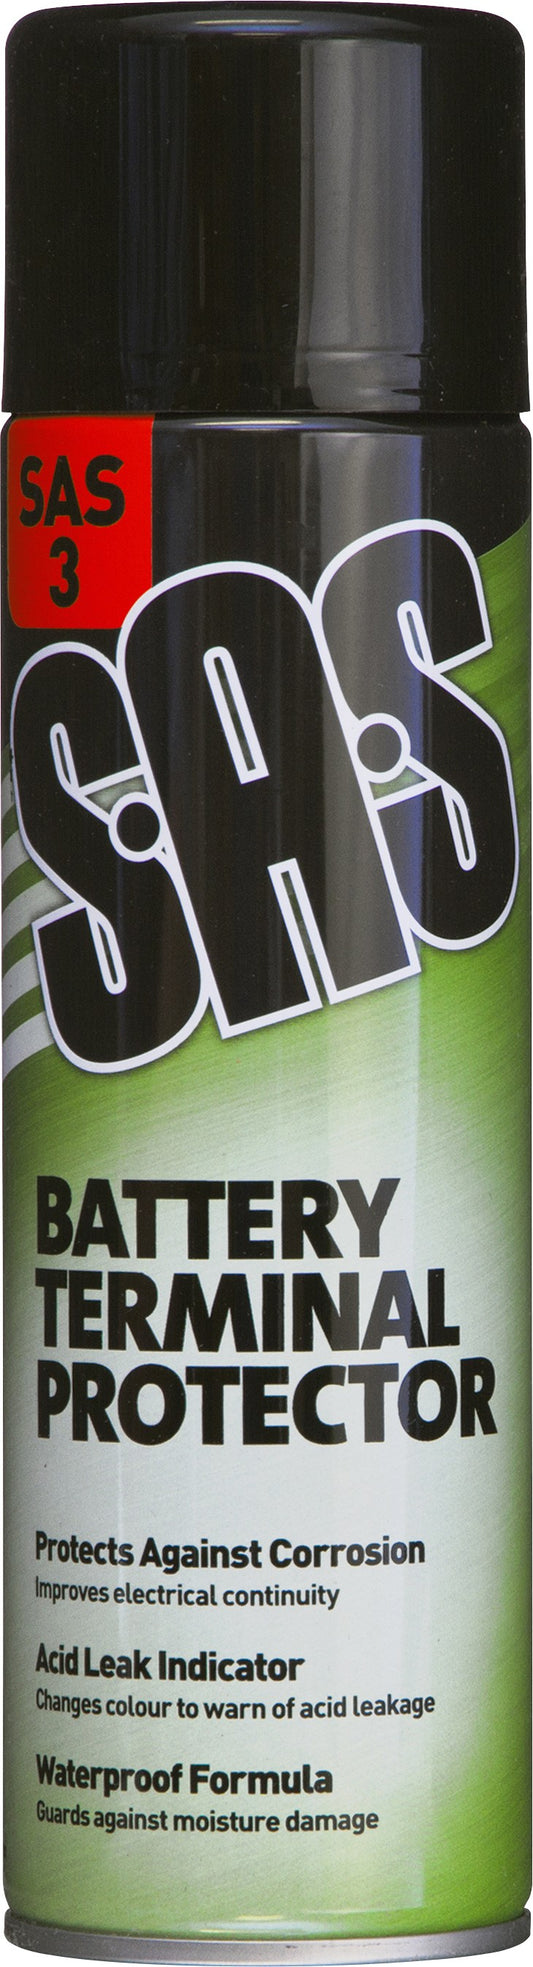 S.A.S Battery Terminal Protector 500ml